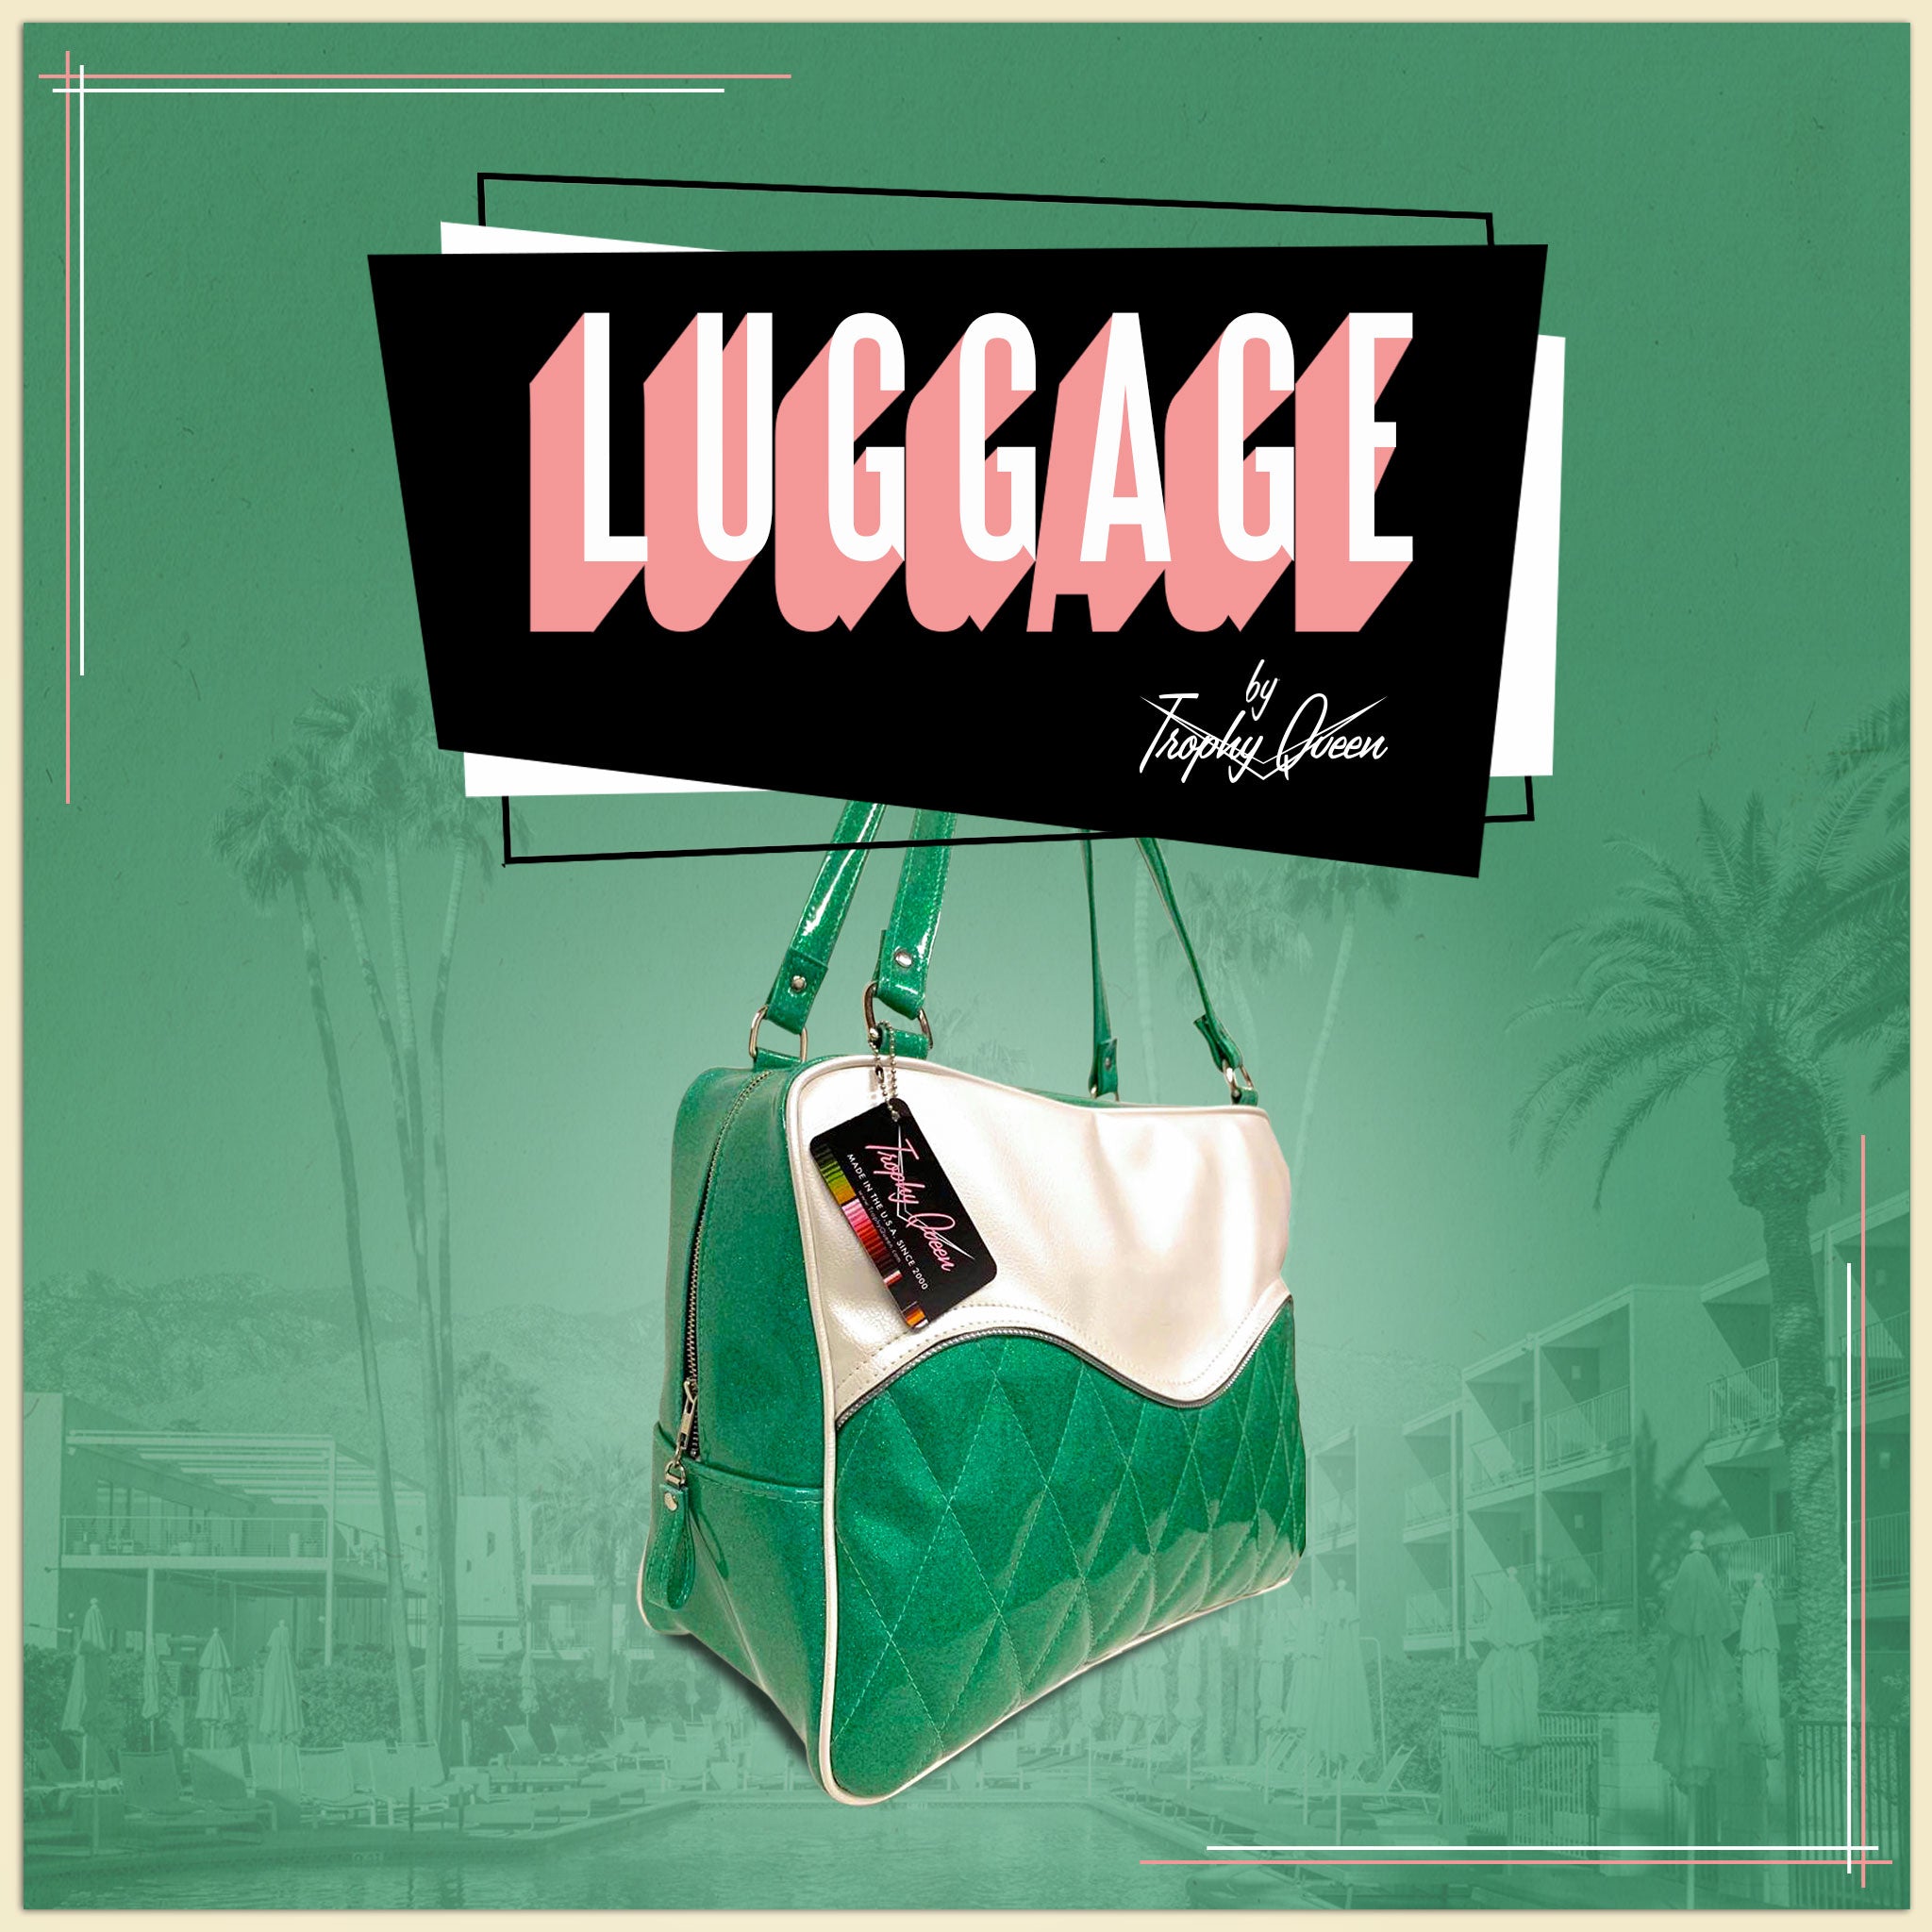 Luggage – Trophy Queen